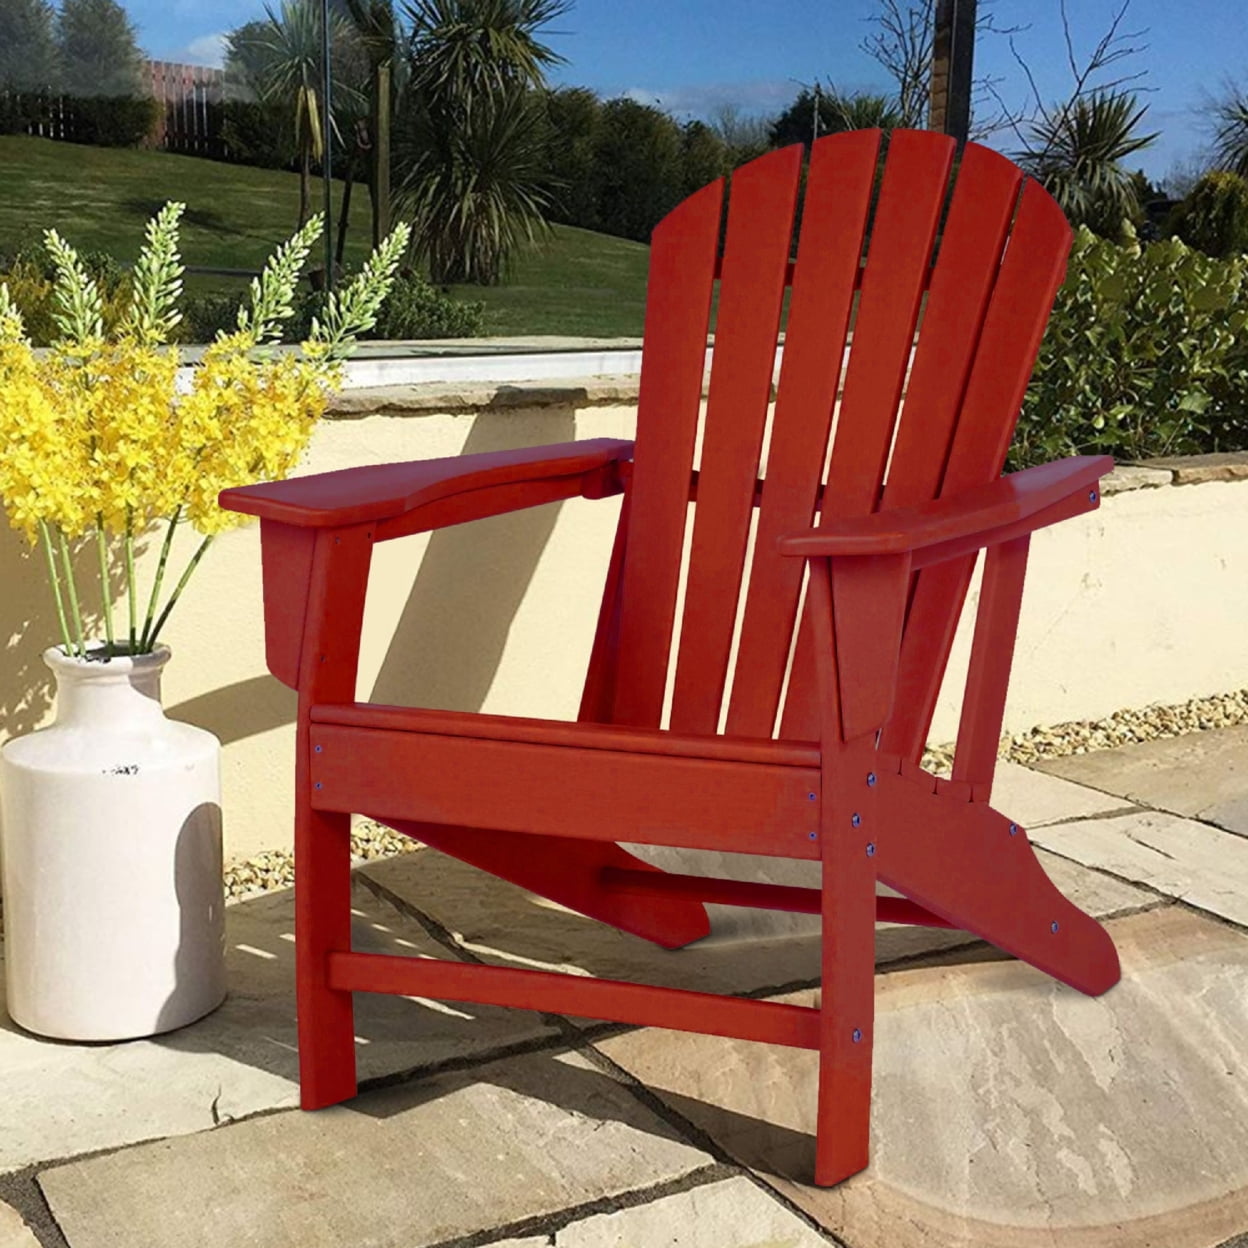 Picture of Benjara BM209702 37.88 x 31.38 x 31.75 in. Contemporary Plastic Adirondack Chair with Slatted Back, Red